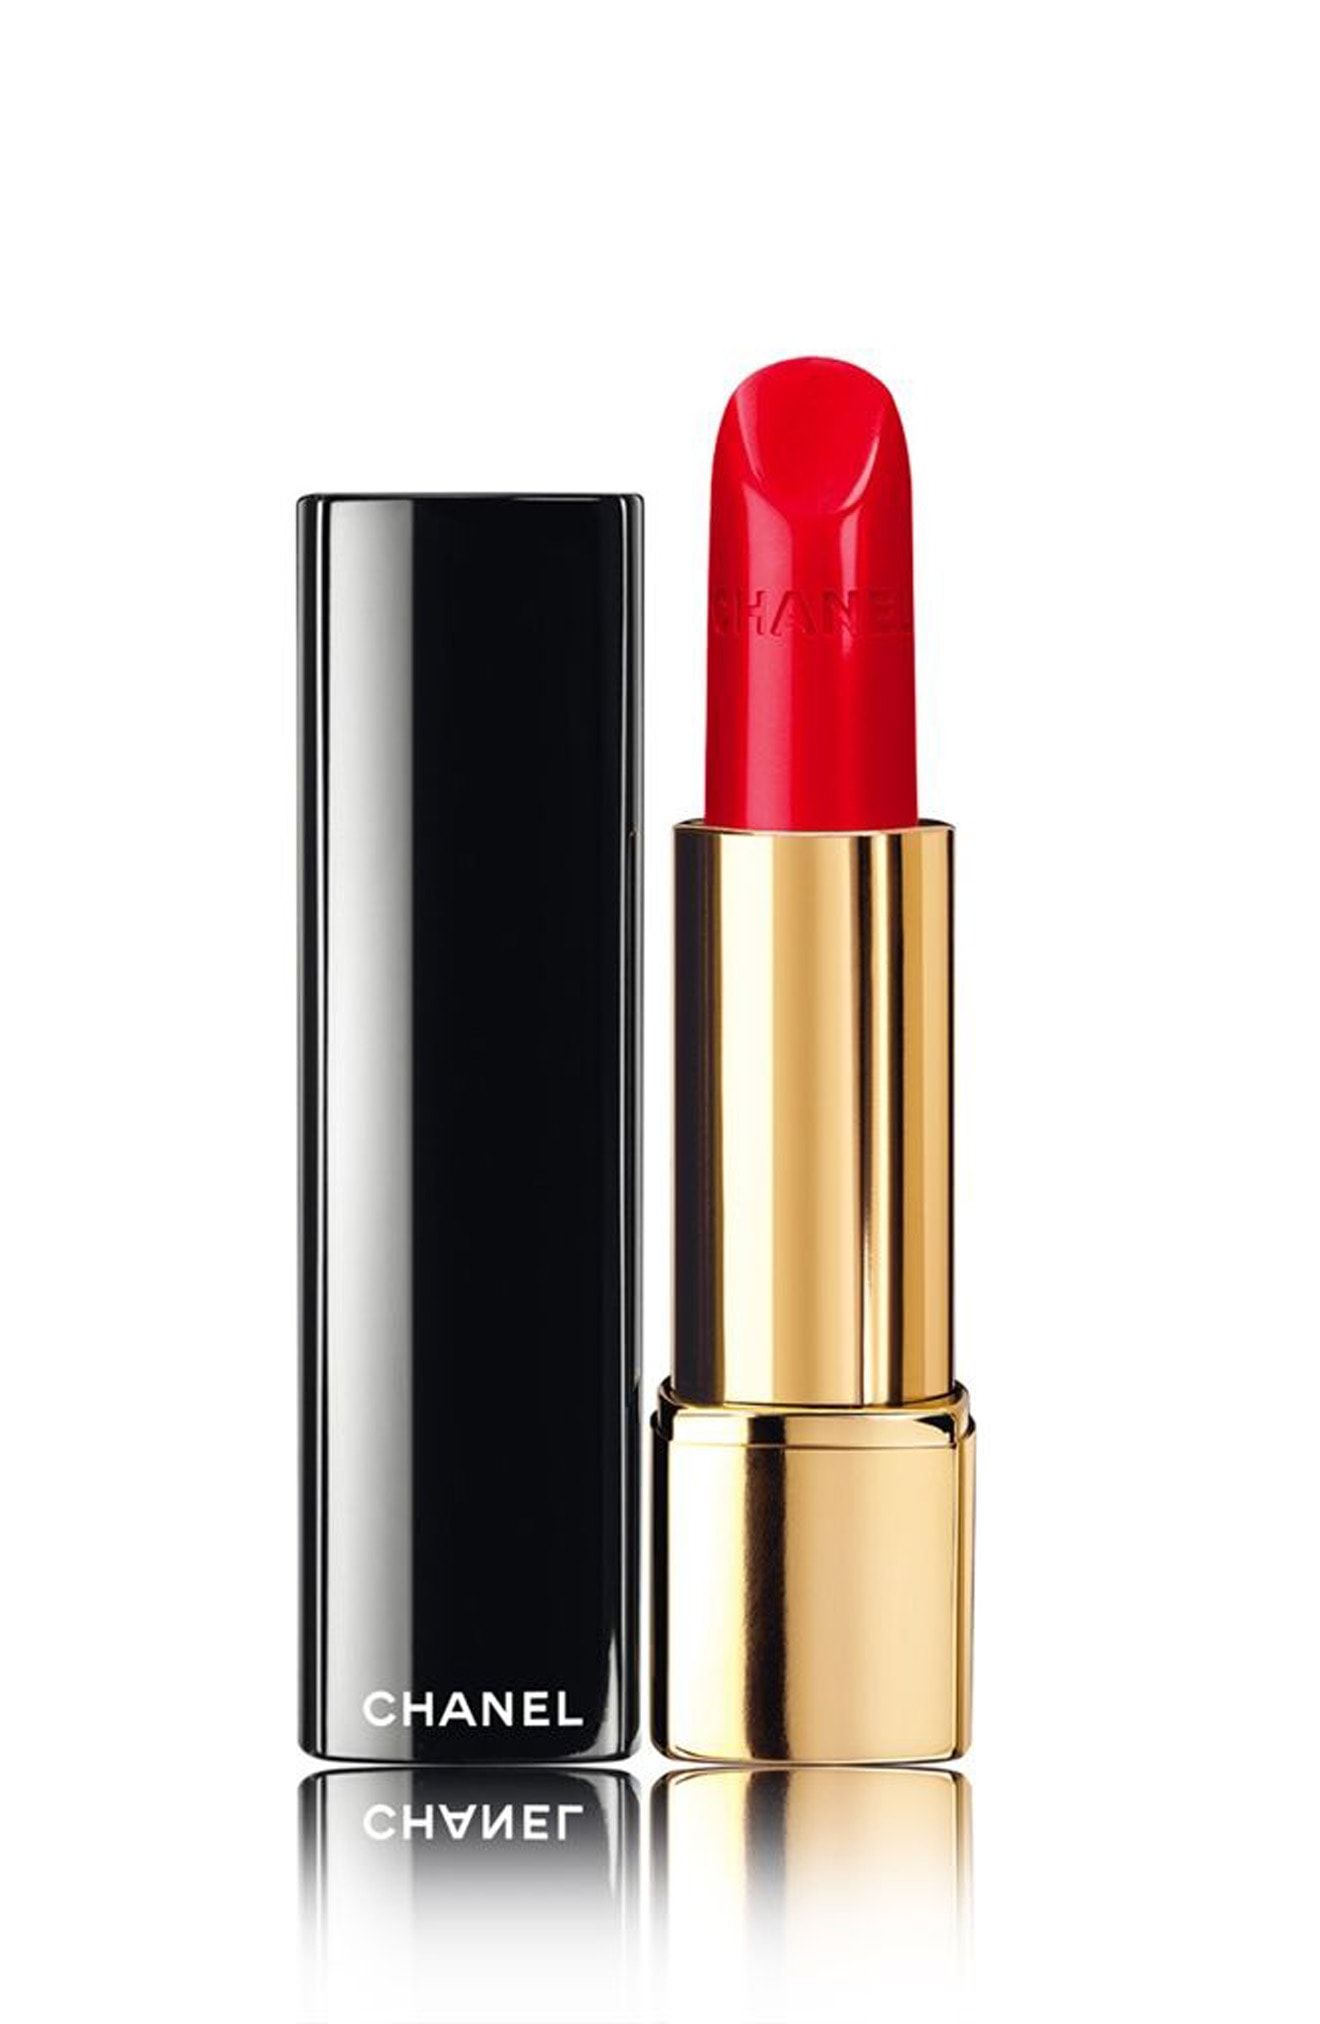 Chanel Red Lipsticks For All Skin Tones 6 Flattering Red Lipsticks From Chanel